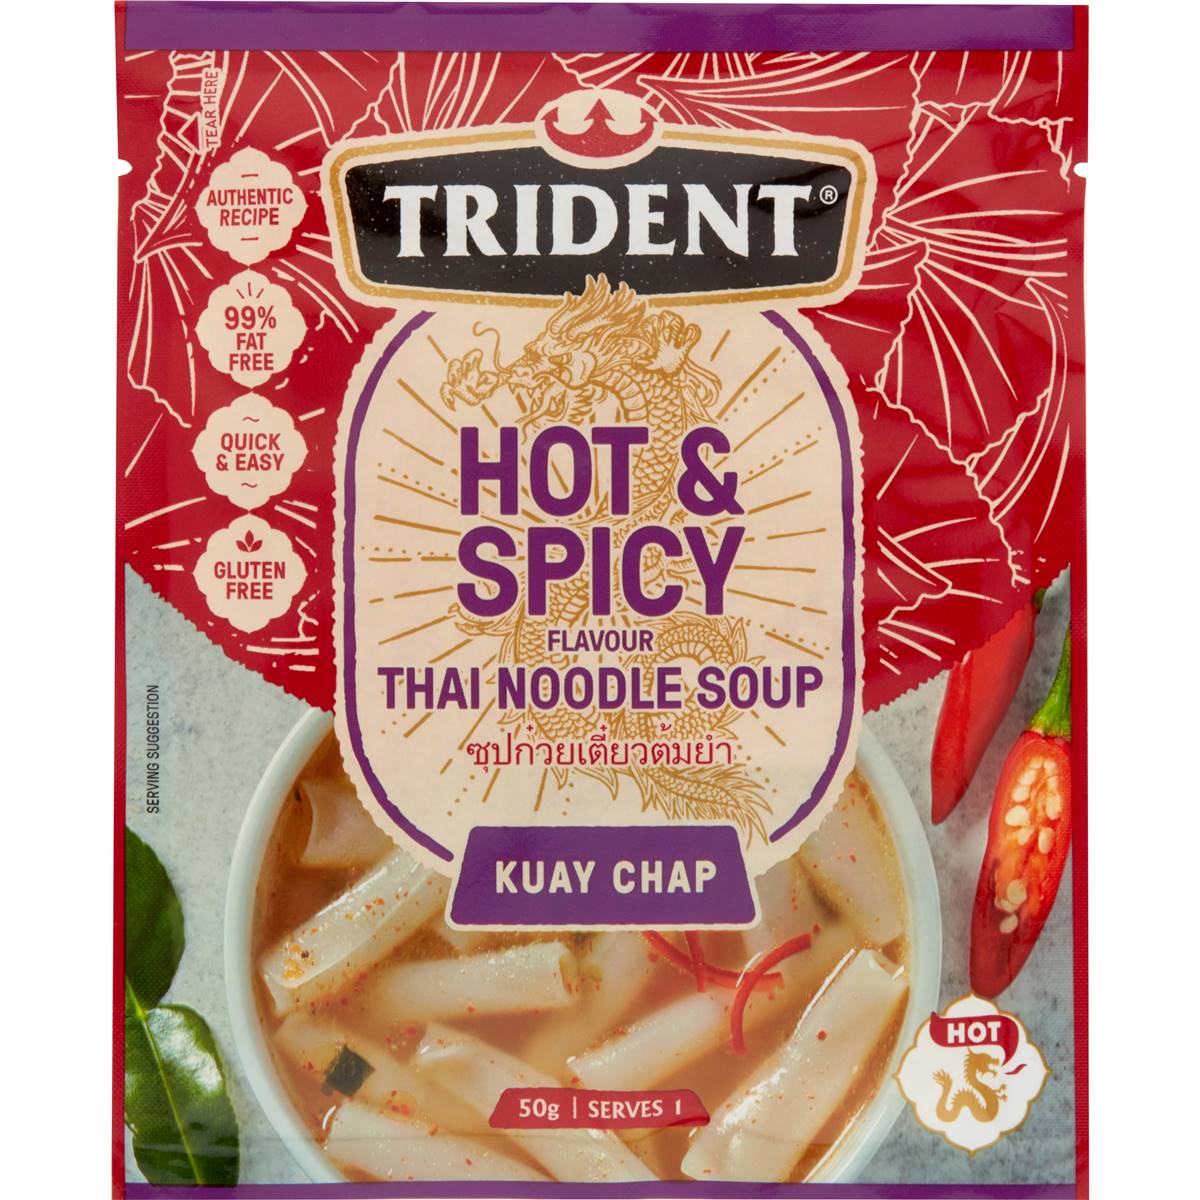 Calories in Trident Hot & Spicy Flavour Thai With Noodles Soup